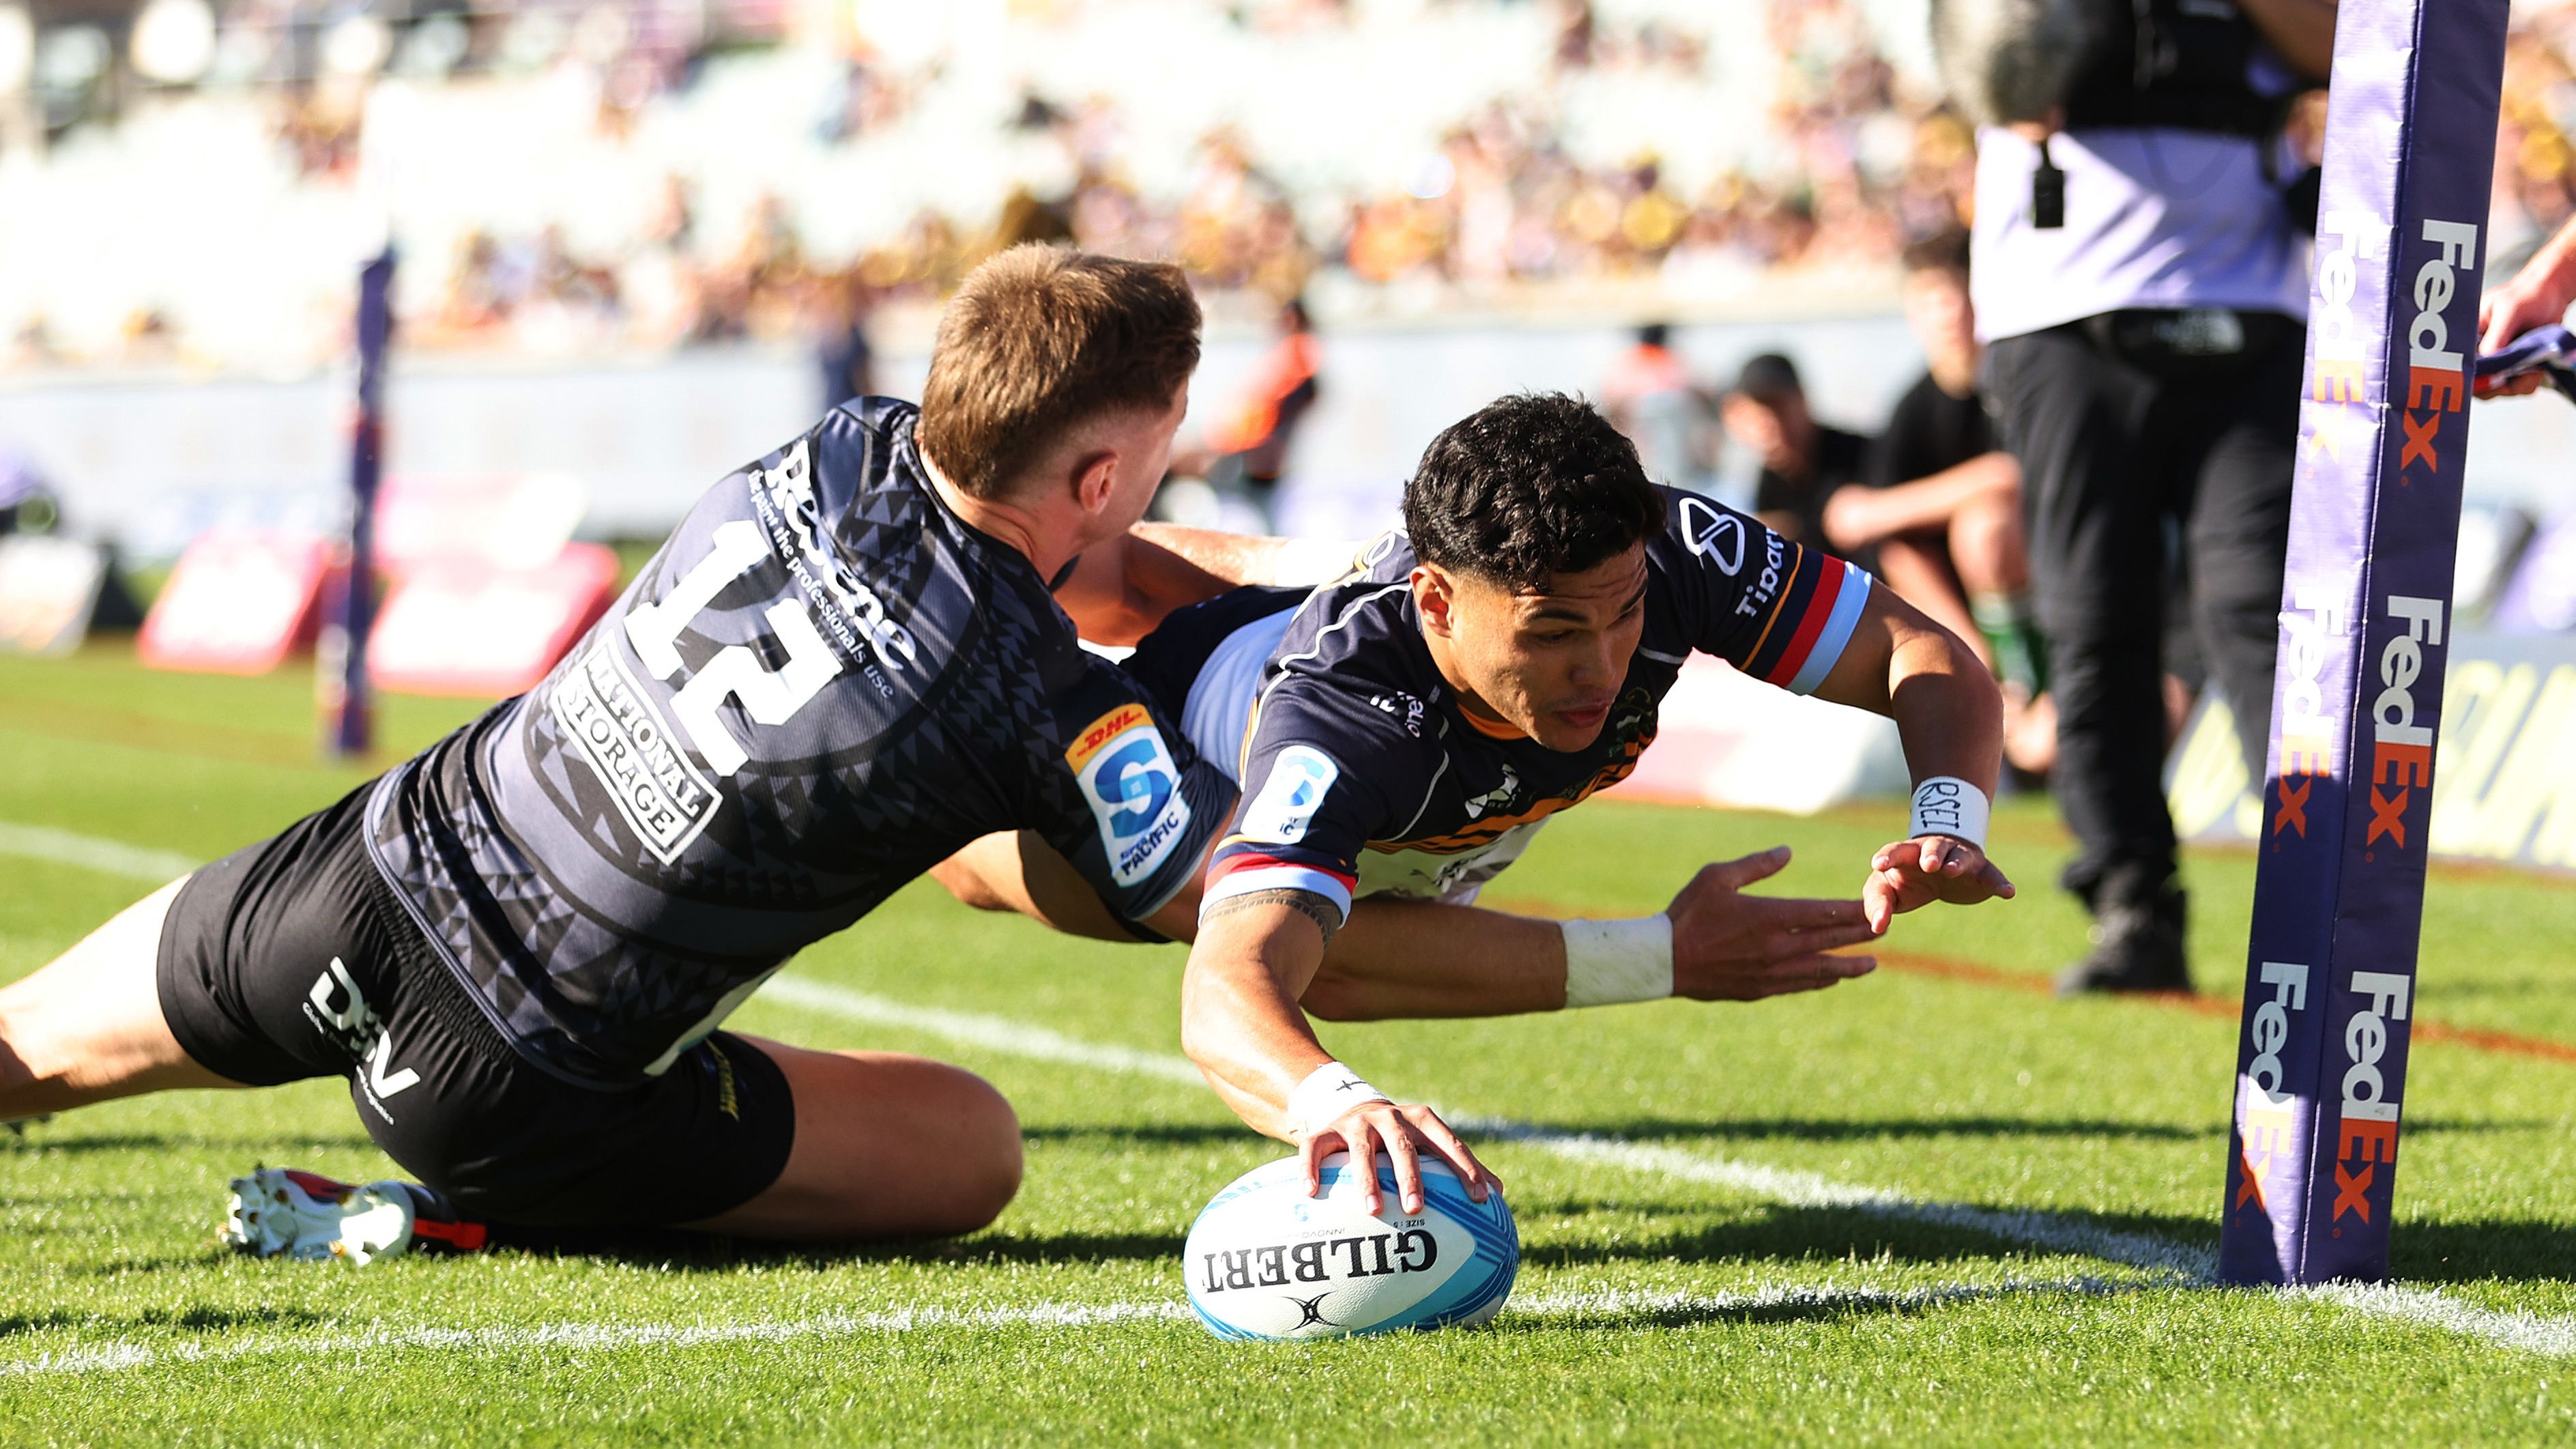 Noah Lolesio of the Brumbies scores a try.